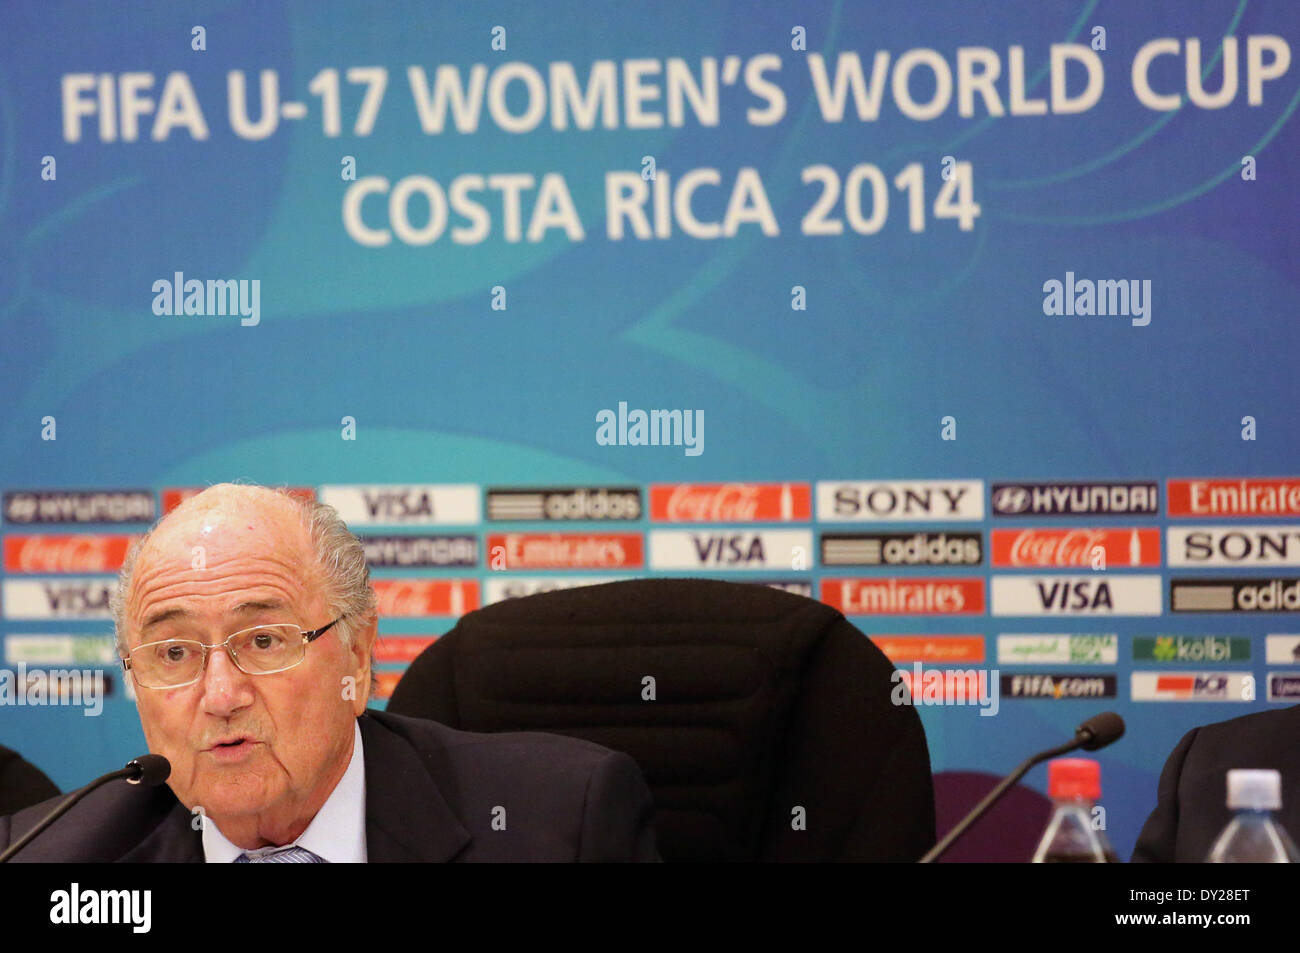 San Jose, Costa Rica. 3rd Apr, 2014. FIFA President Joseph Blatter delivers a speech during a press conference of the FIFA U-17 Women's World Cup Costa Rica 2014 in San Jose, Costa Rica, on April 3, 2014. Joseph Blatter was in Costa Rica to participate in the closure activities of the FIFA U-17 Women's World Cup Costa Rica 2014. © Kent Gilbert/Xinhua/Alamy Live News Stock Photo